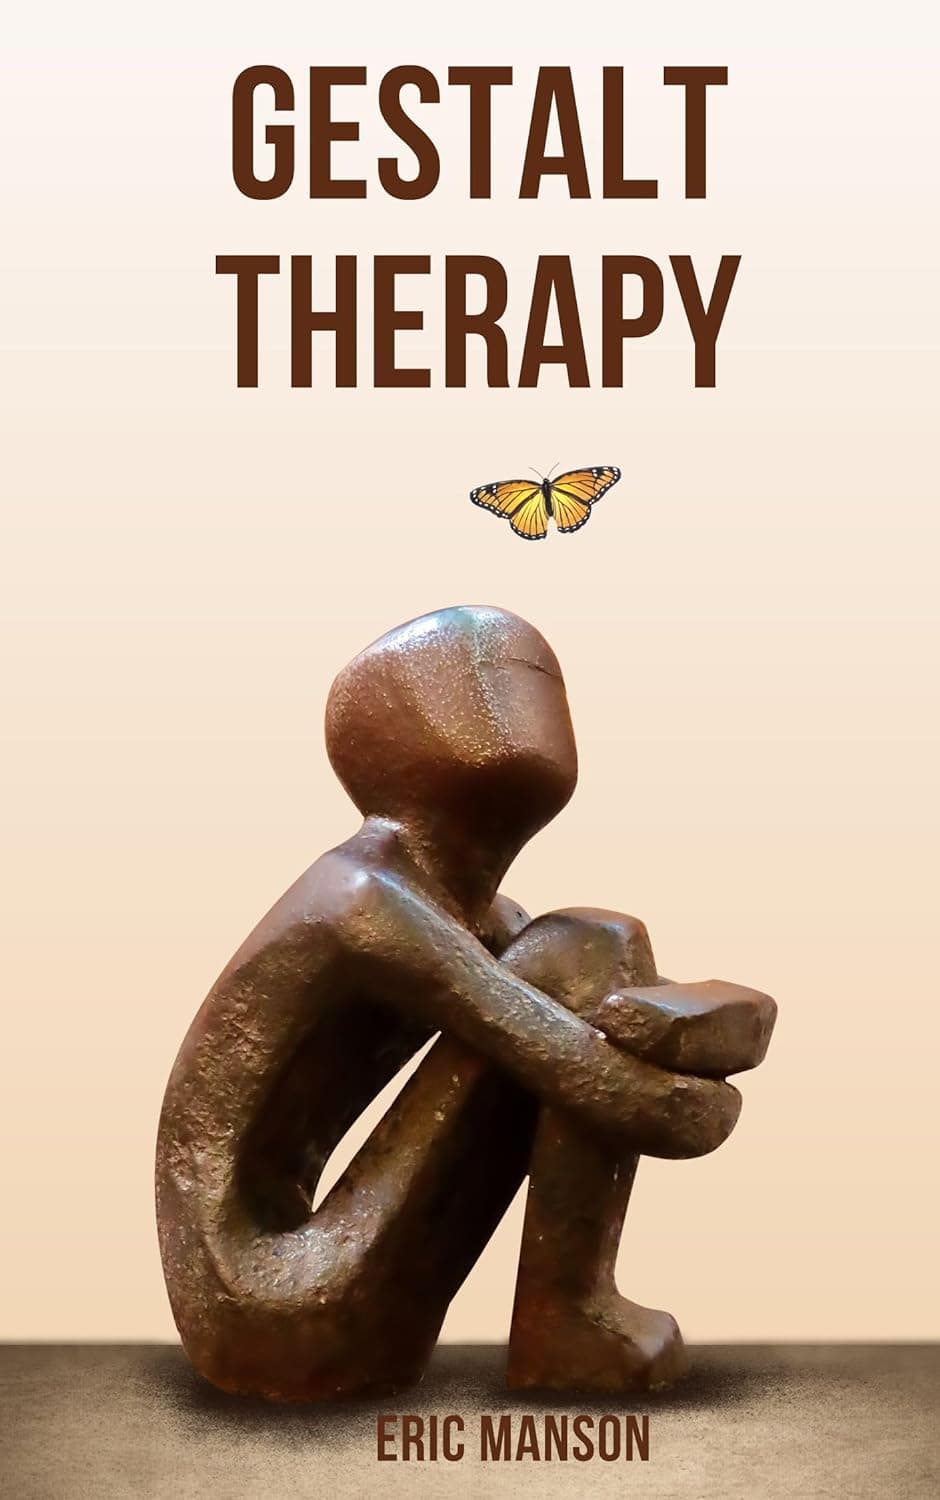 Gestalt Therapy: The Power of the Present Moment in Healing